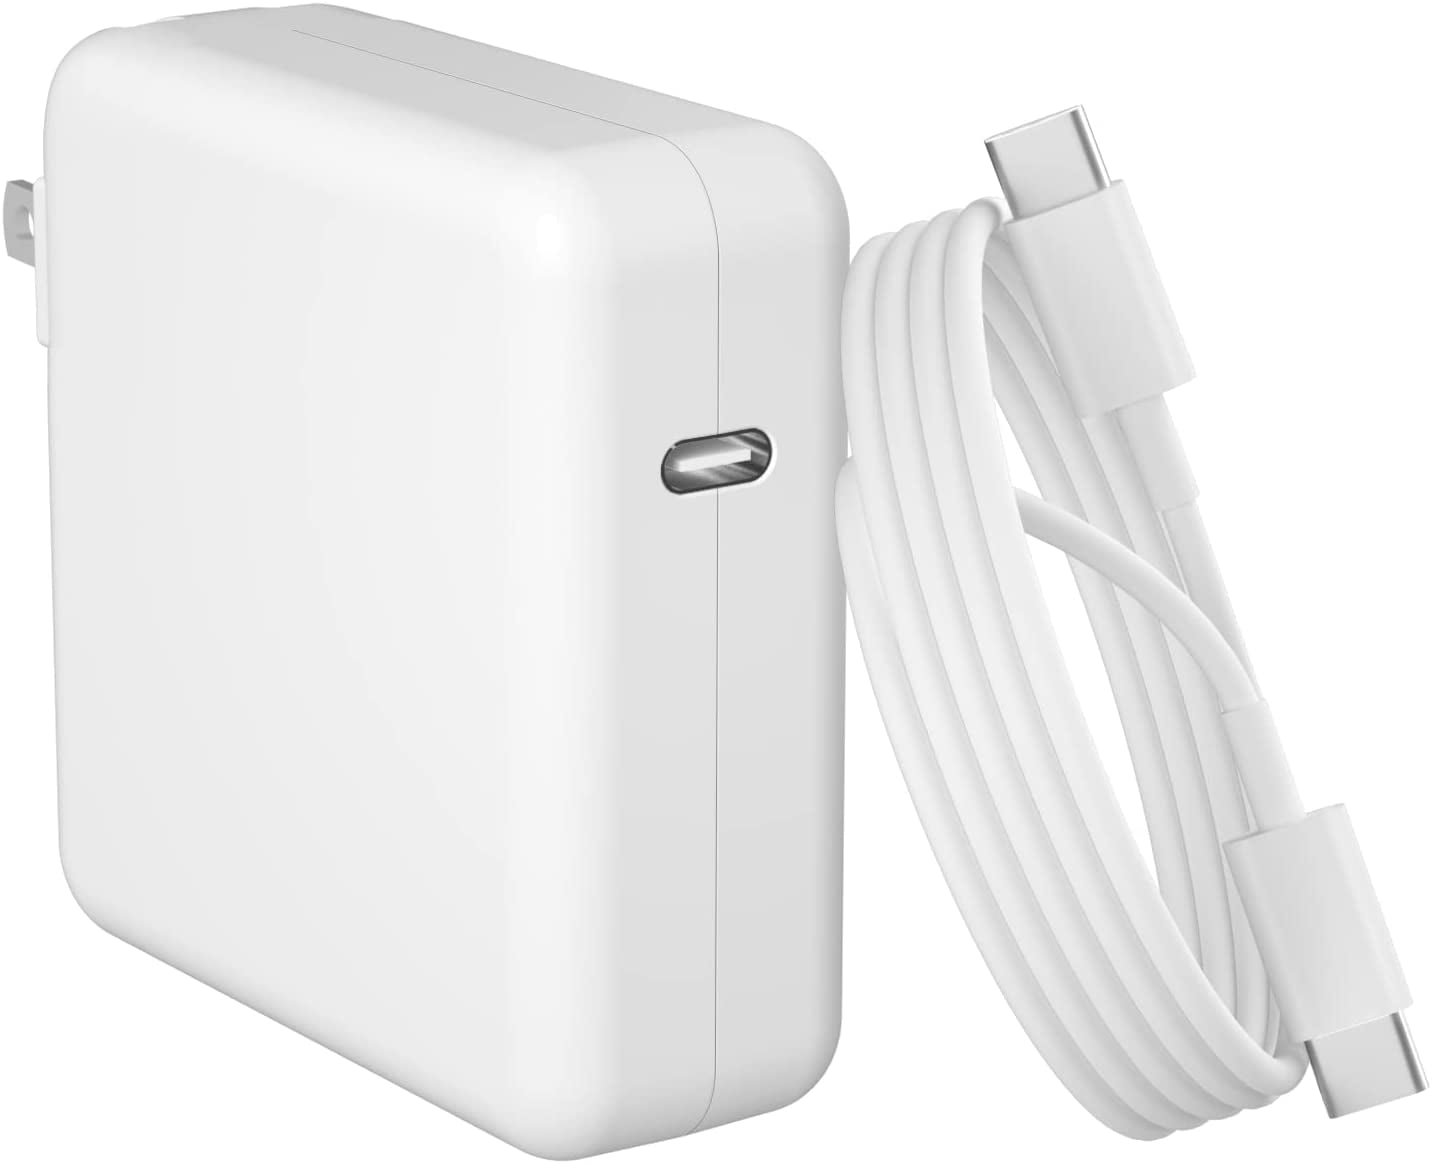 Mac Book Pro Charger,Replacement for Mac Book Pro 13 Inch 2012-2016 Retina  Display AC 60W 2 T Shape Connector Power Adapter (Color: White-1)